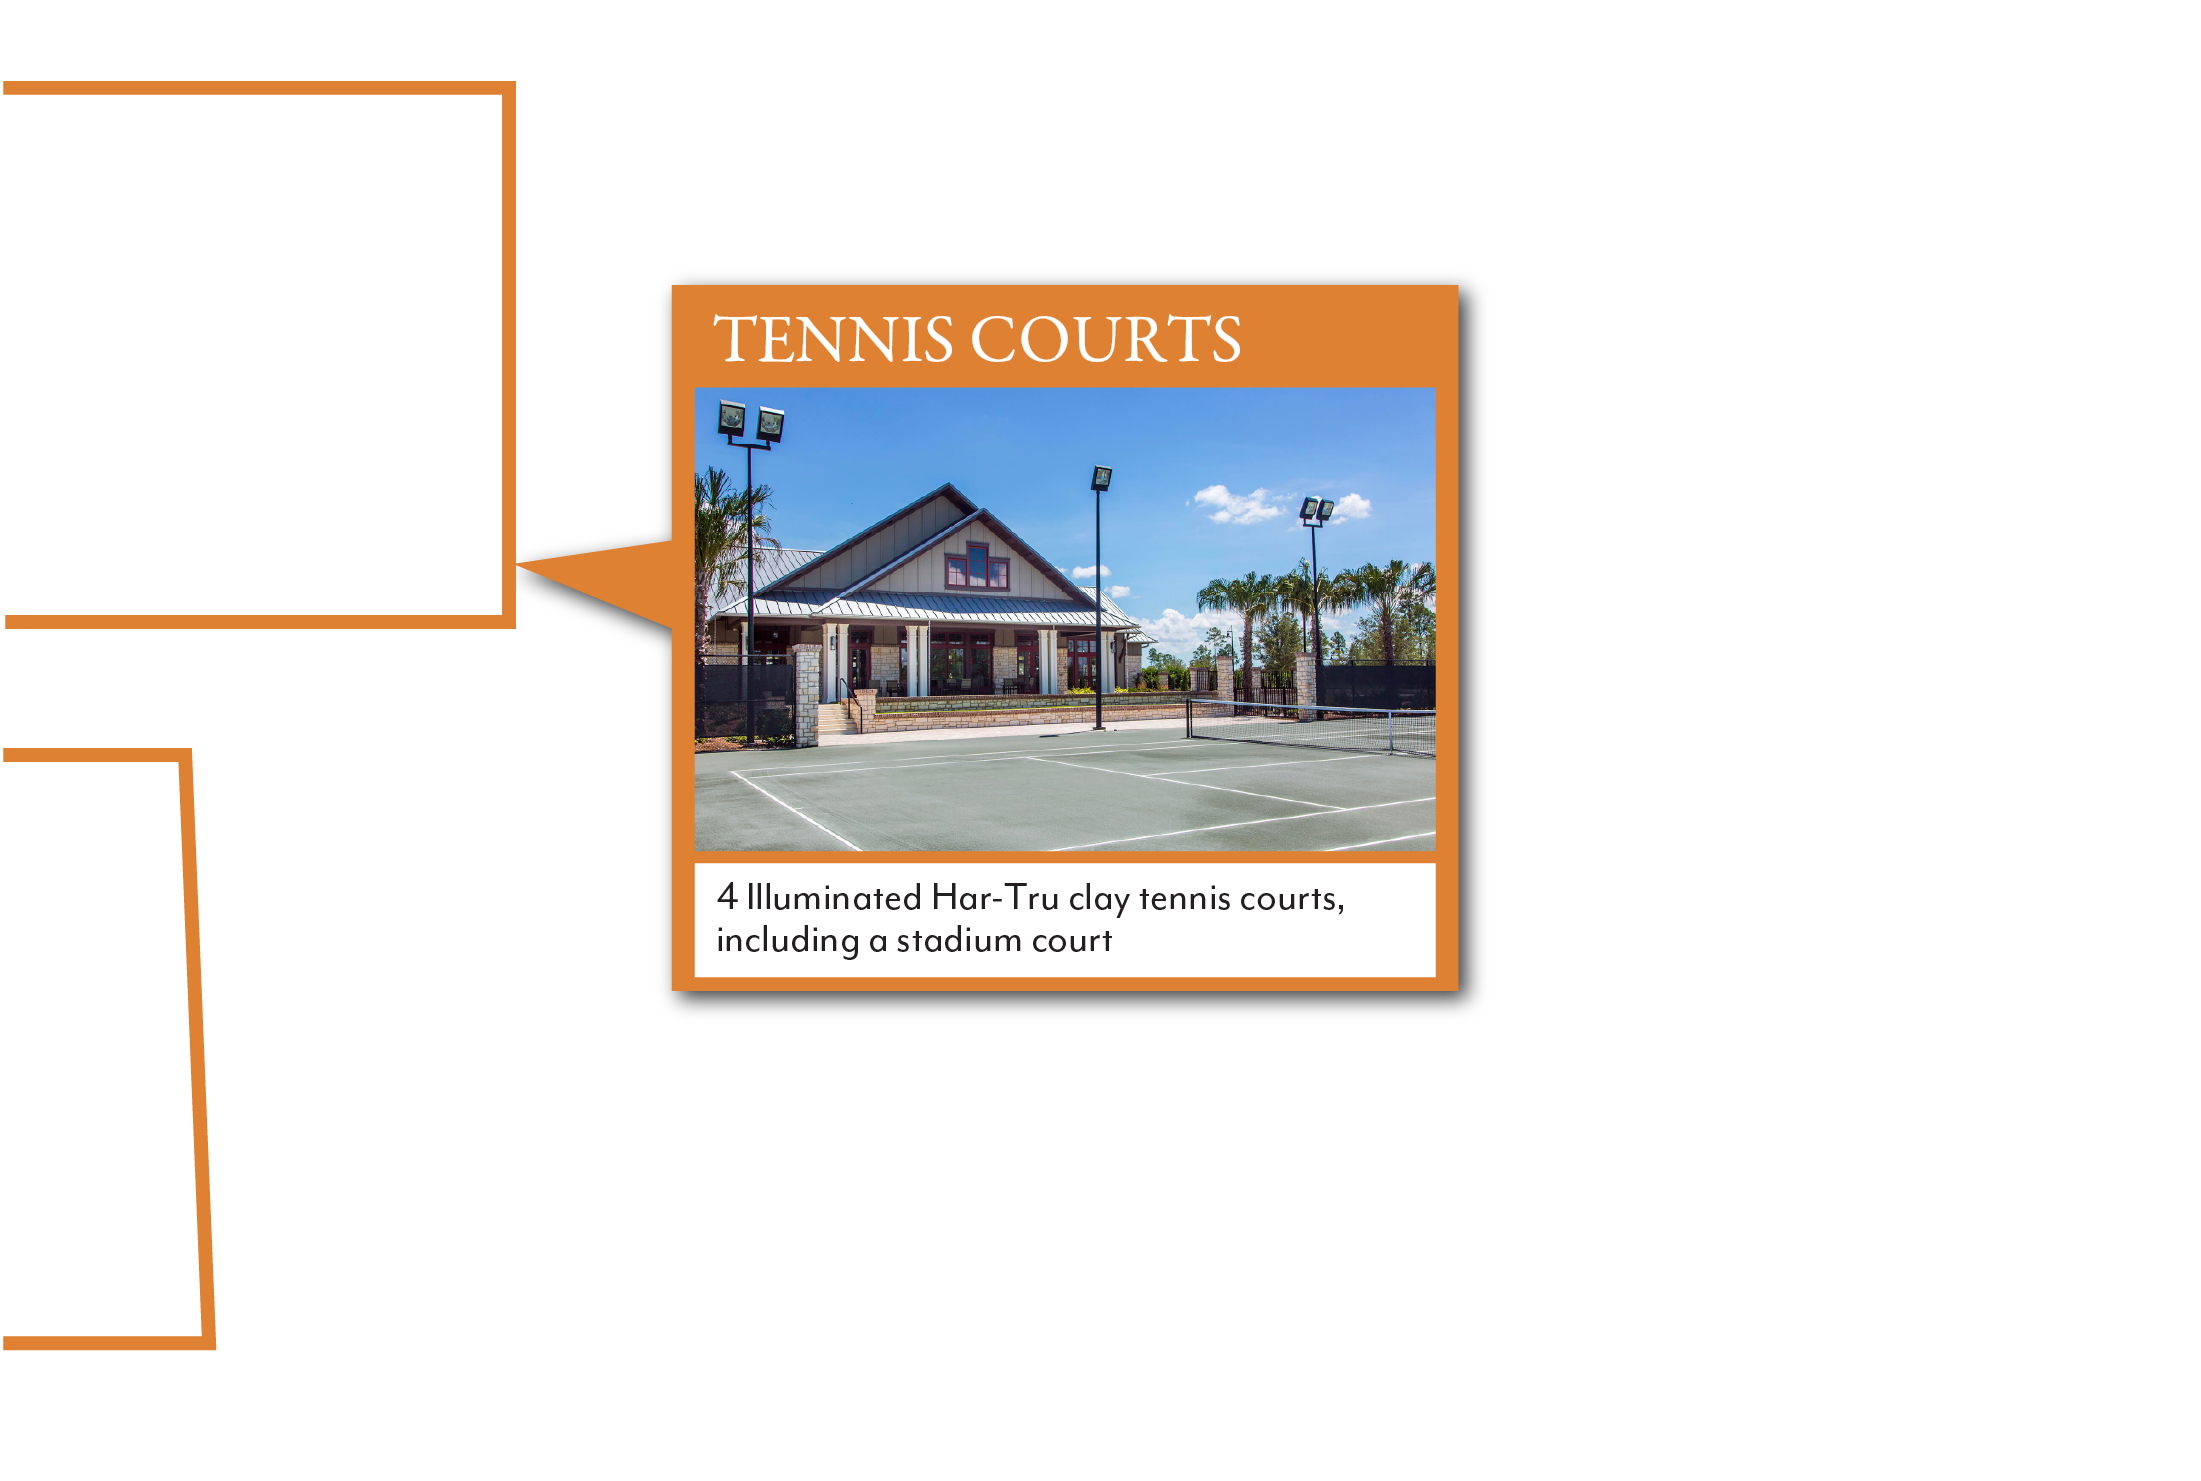 Shearwater community Tennis Courts